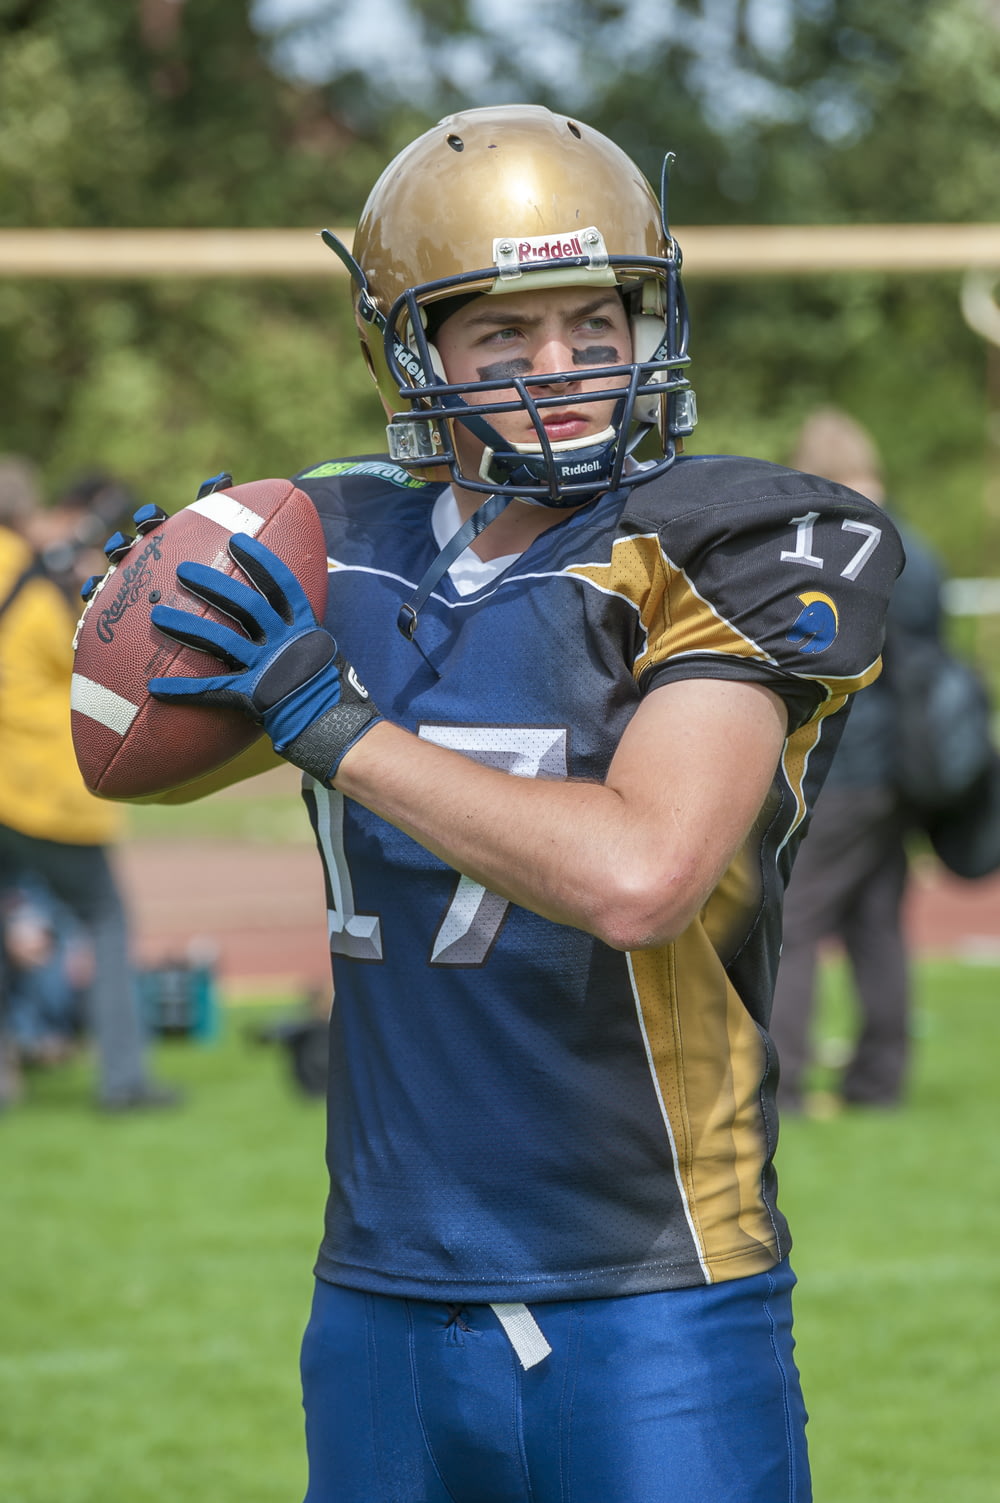 a football player holding a football on a field